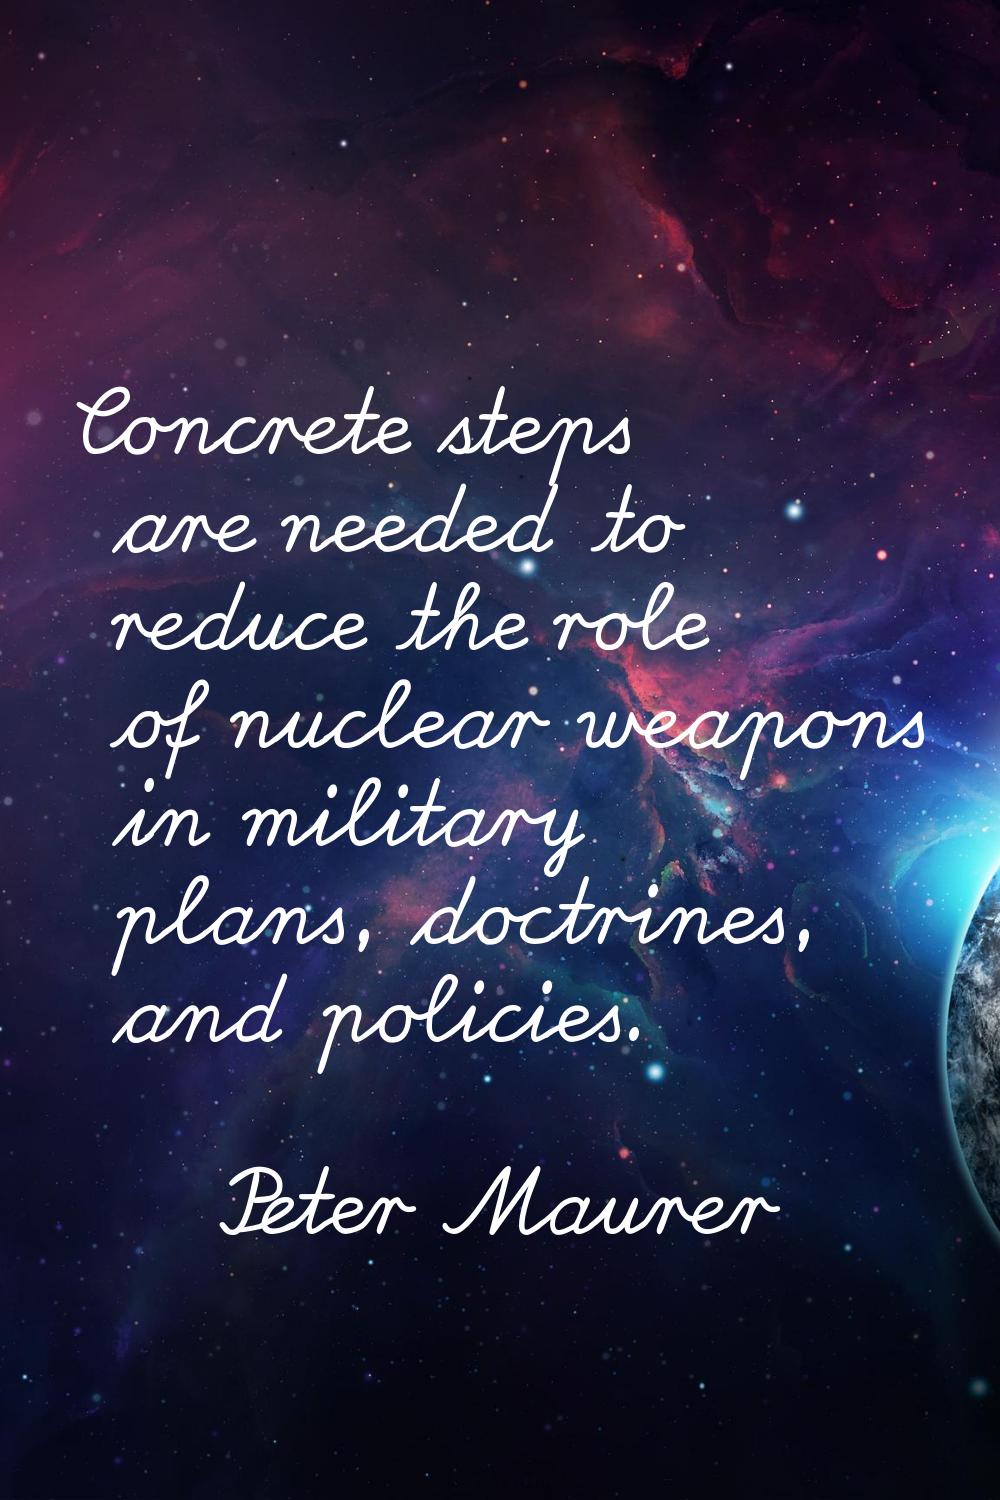 Concrete steps are needed to reduce the role of nuclear weapons in military plans, doctrines, and p